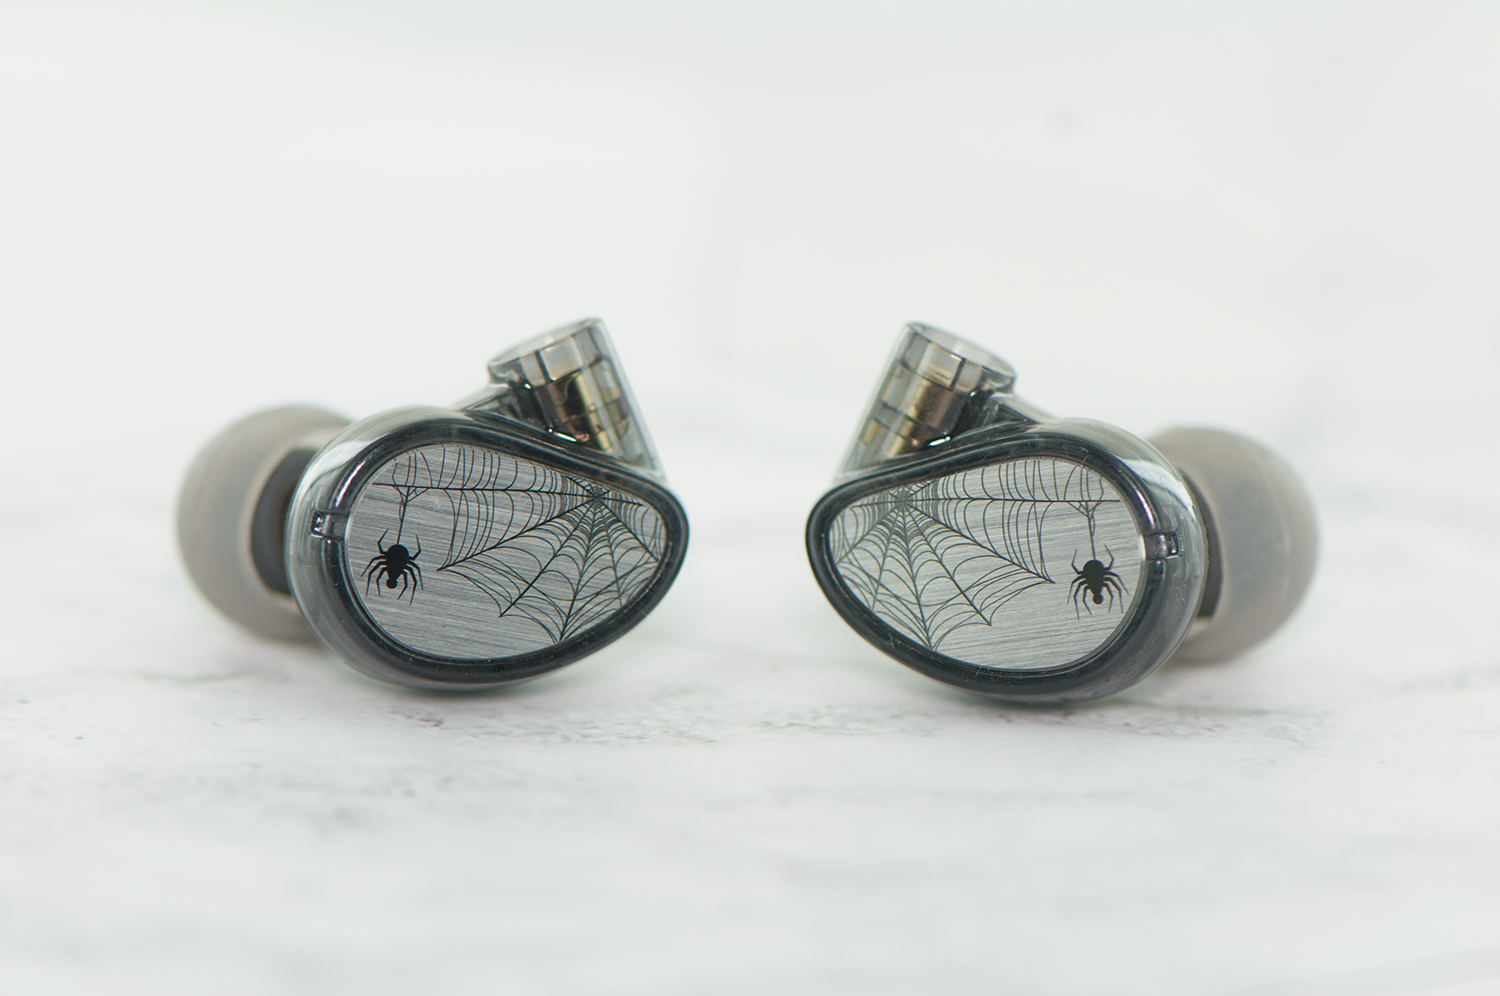 Two high-end earphones with a spider and web design on a reflective metallic surface, set against a soft white background.